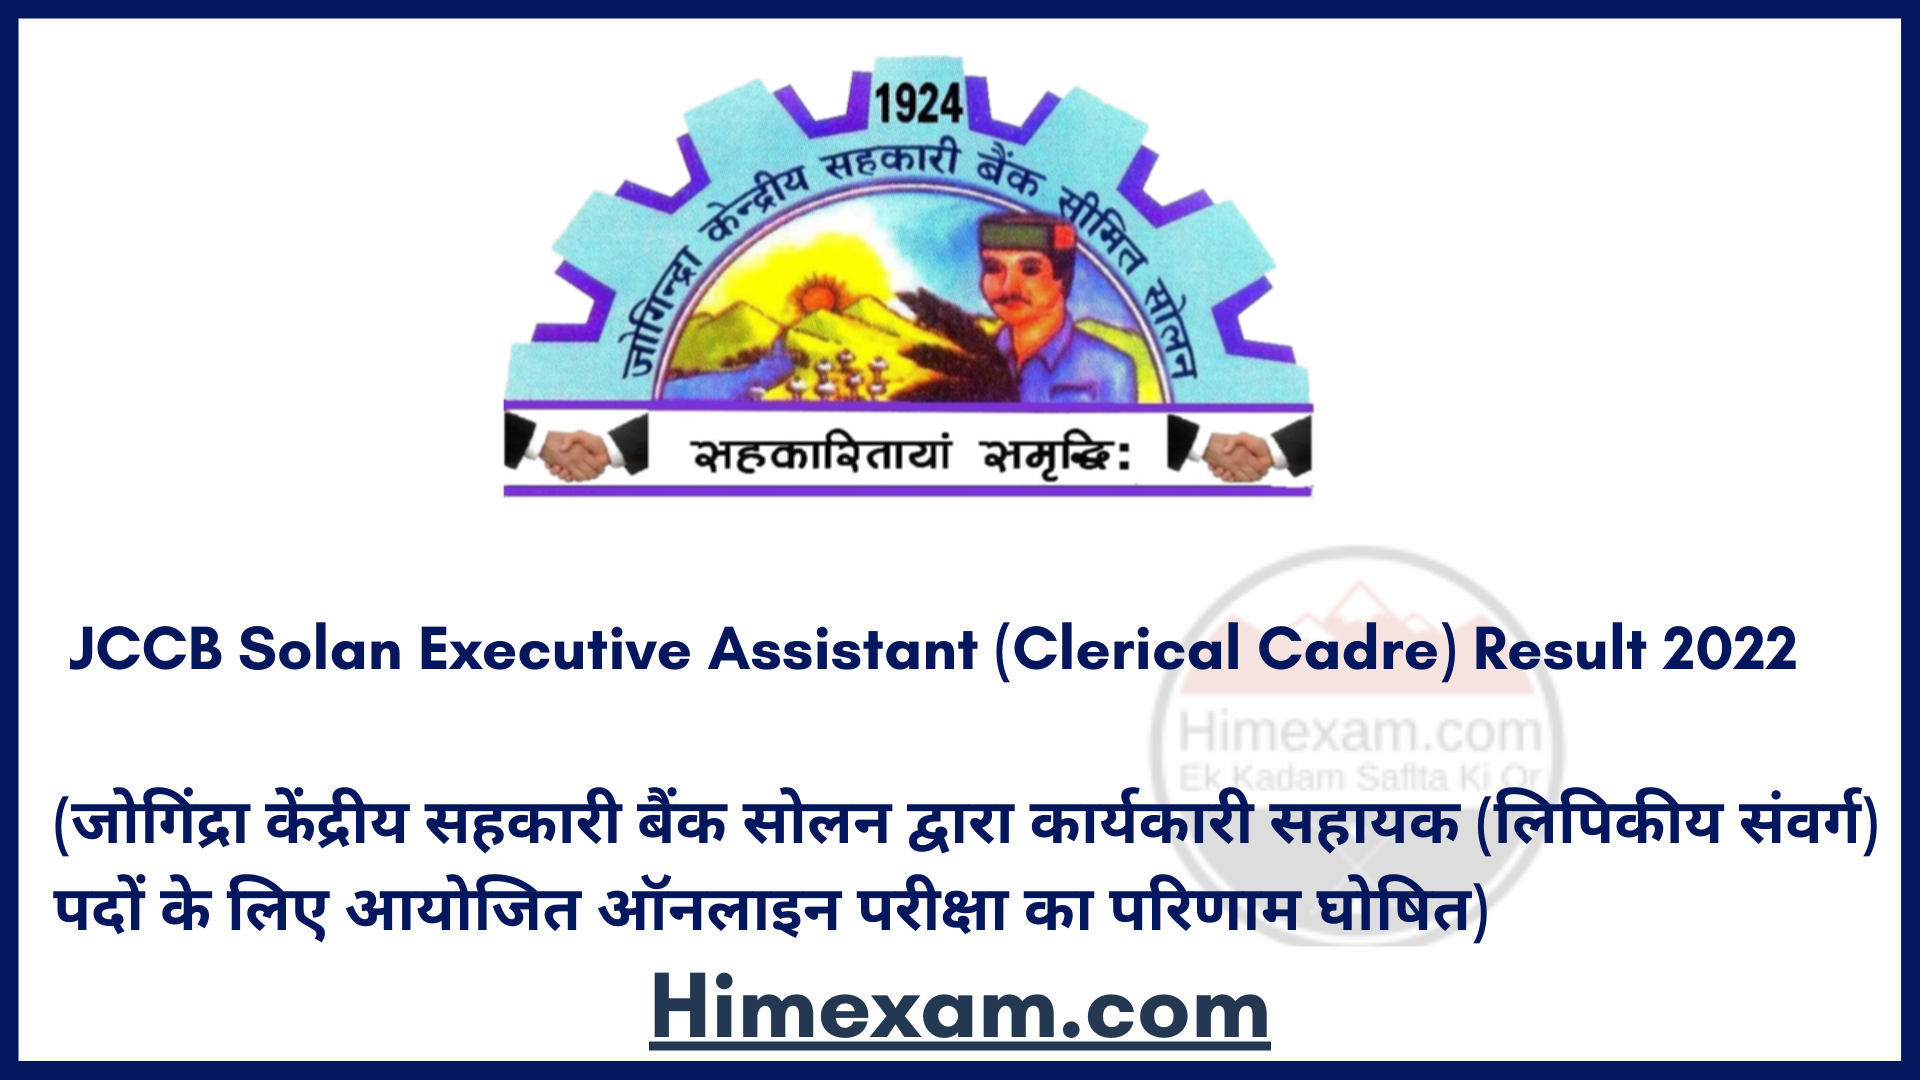 JCCB Solan Executive Assistant (Clerical Cadre) Result 2022